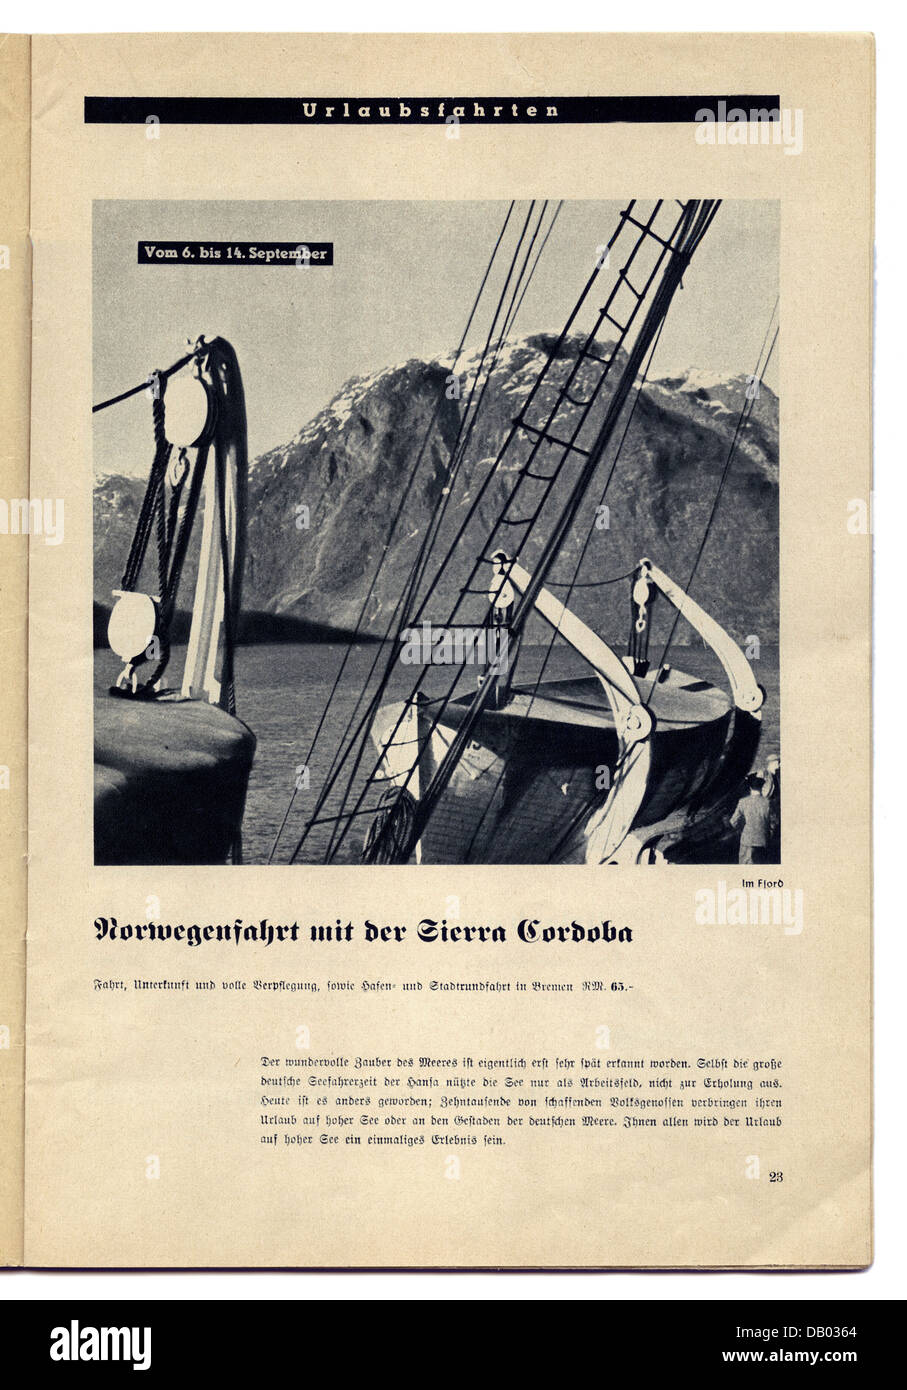 National Socialism, organisations, 'Strength Through Joy' ('Kraft durch Freude', KDF), program magazine of Gau Munich-Upper Bavaria, August 1938, advert, ride to Norway with the 'Sierra Cordoba', Additional-Rights-Clearences-Not Available Stock Photo